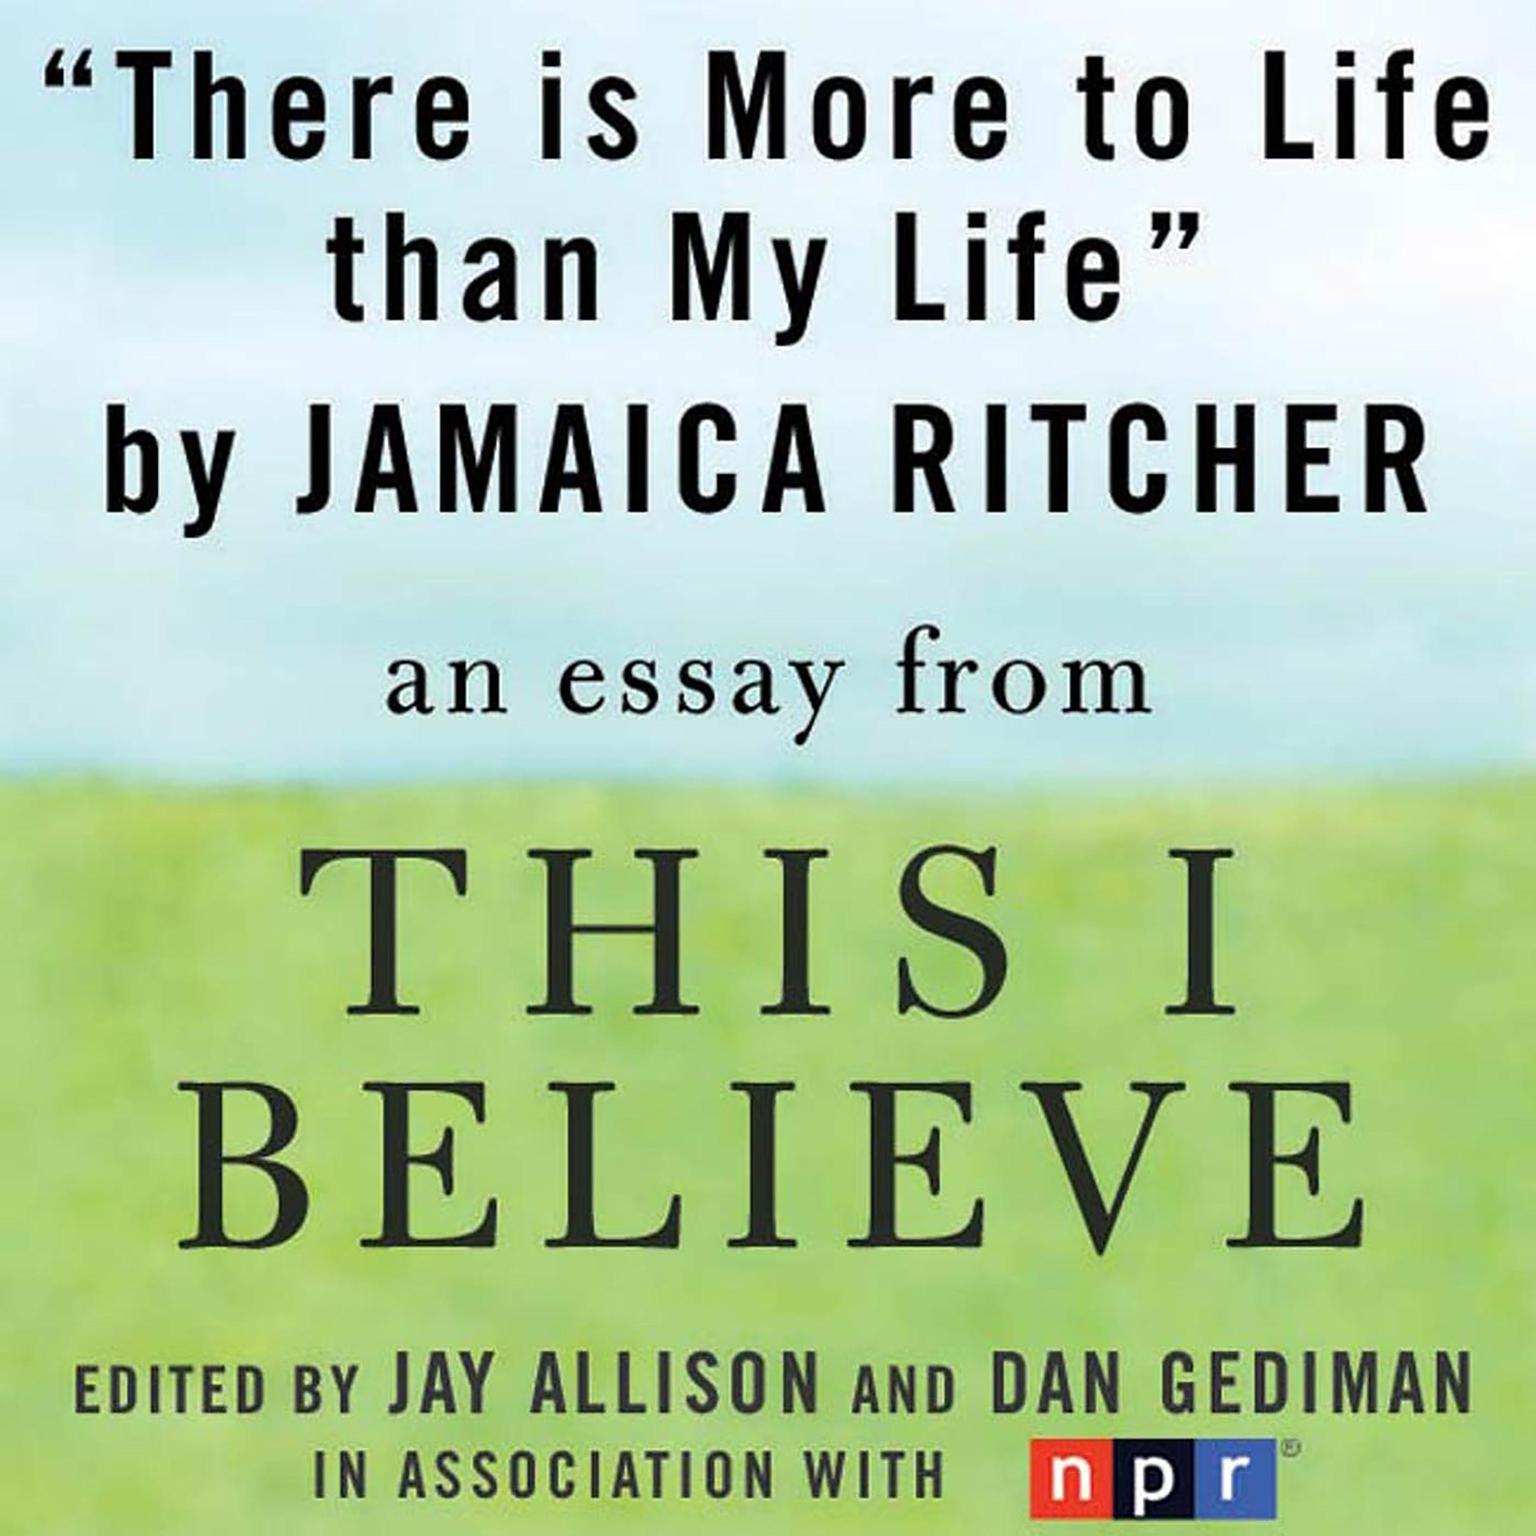 There is More to Life than Life: A This I Believe Essay Audiobook, by Jamaica Ritcher